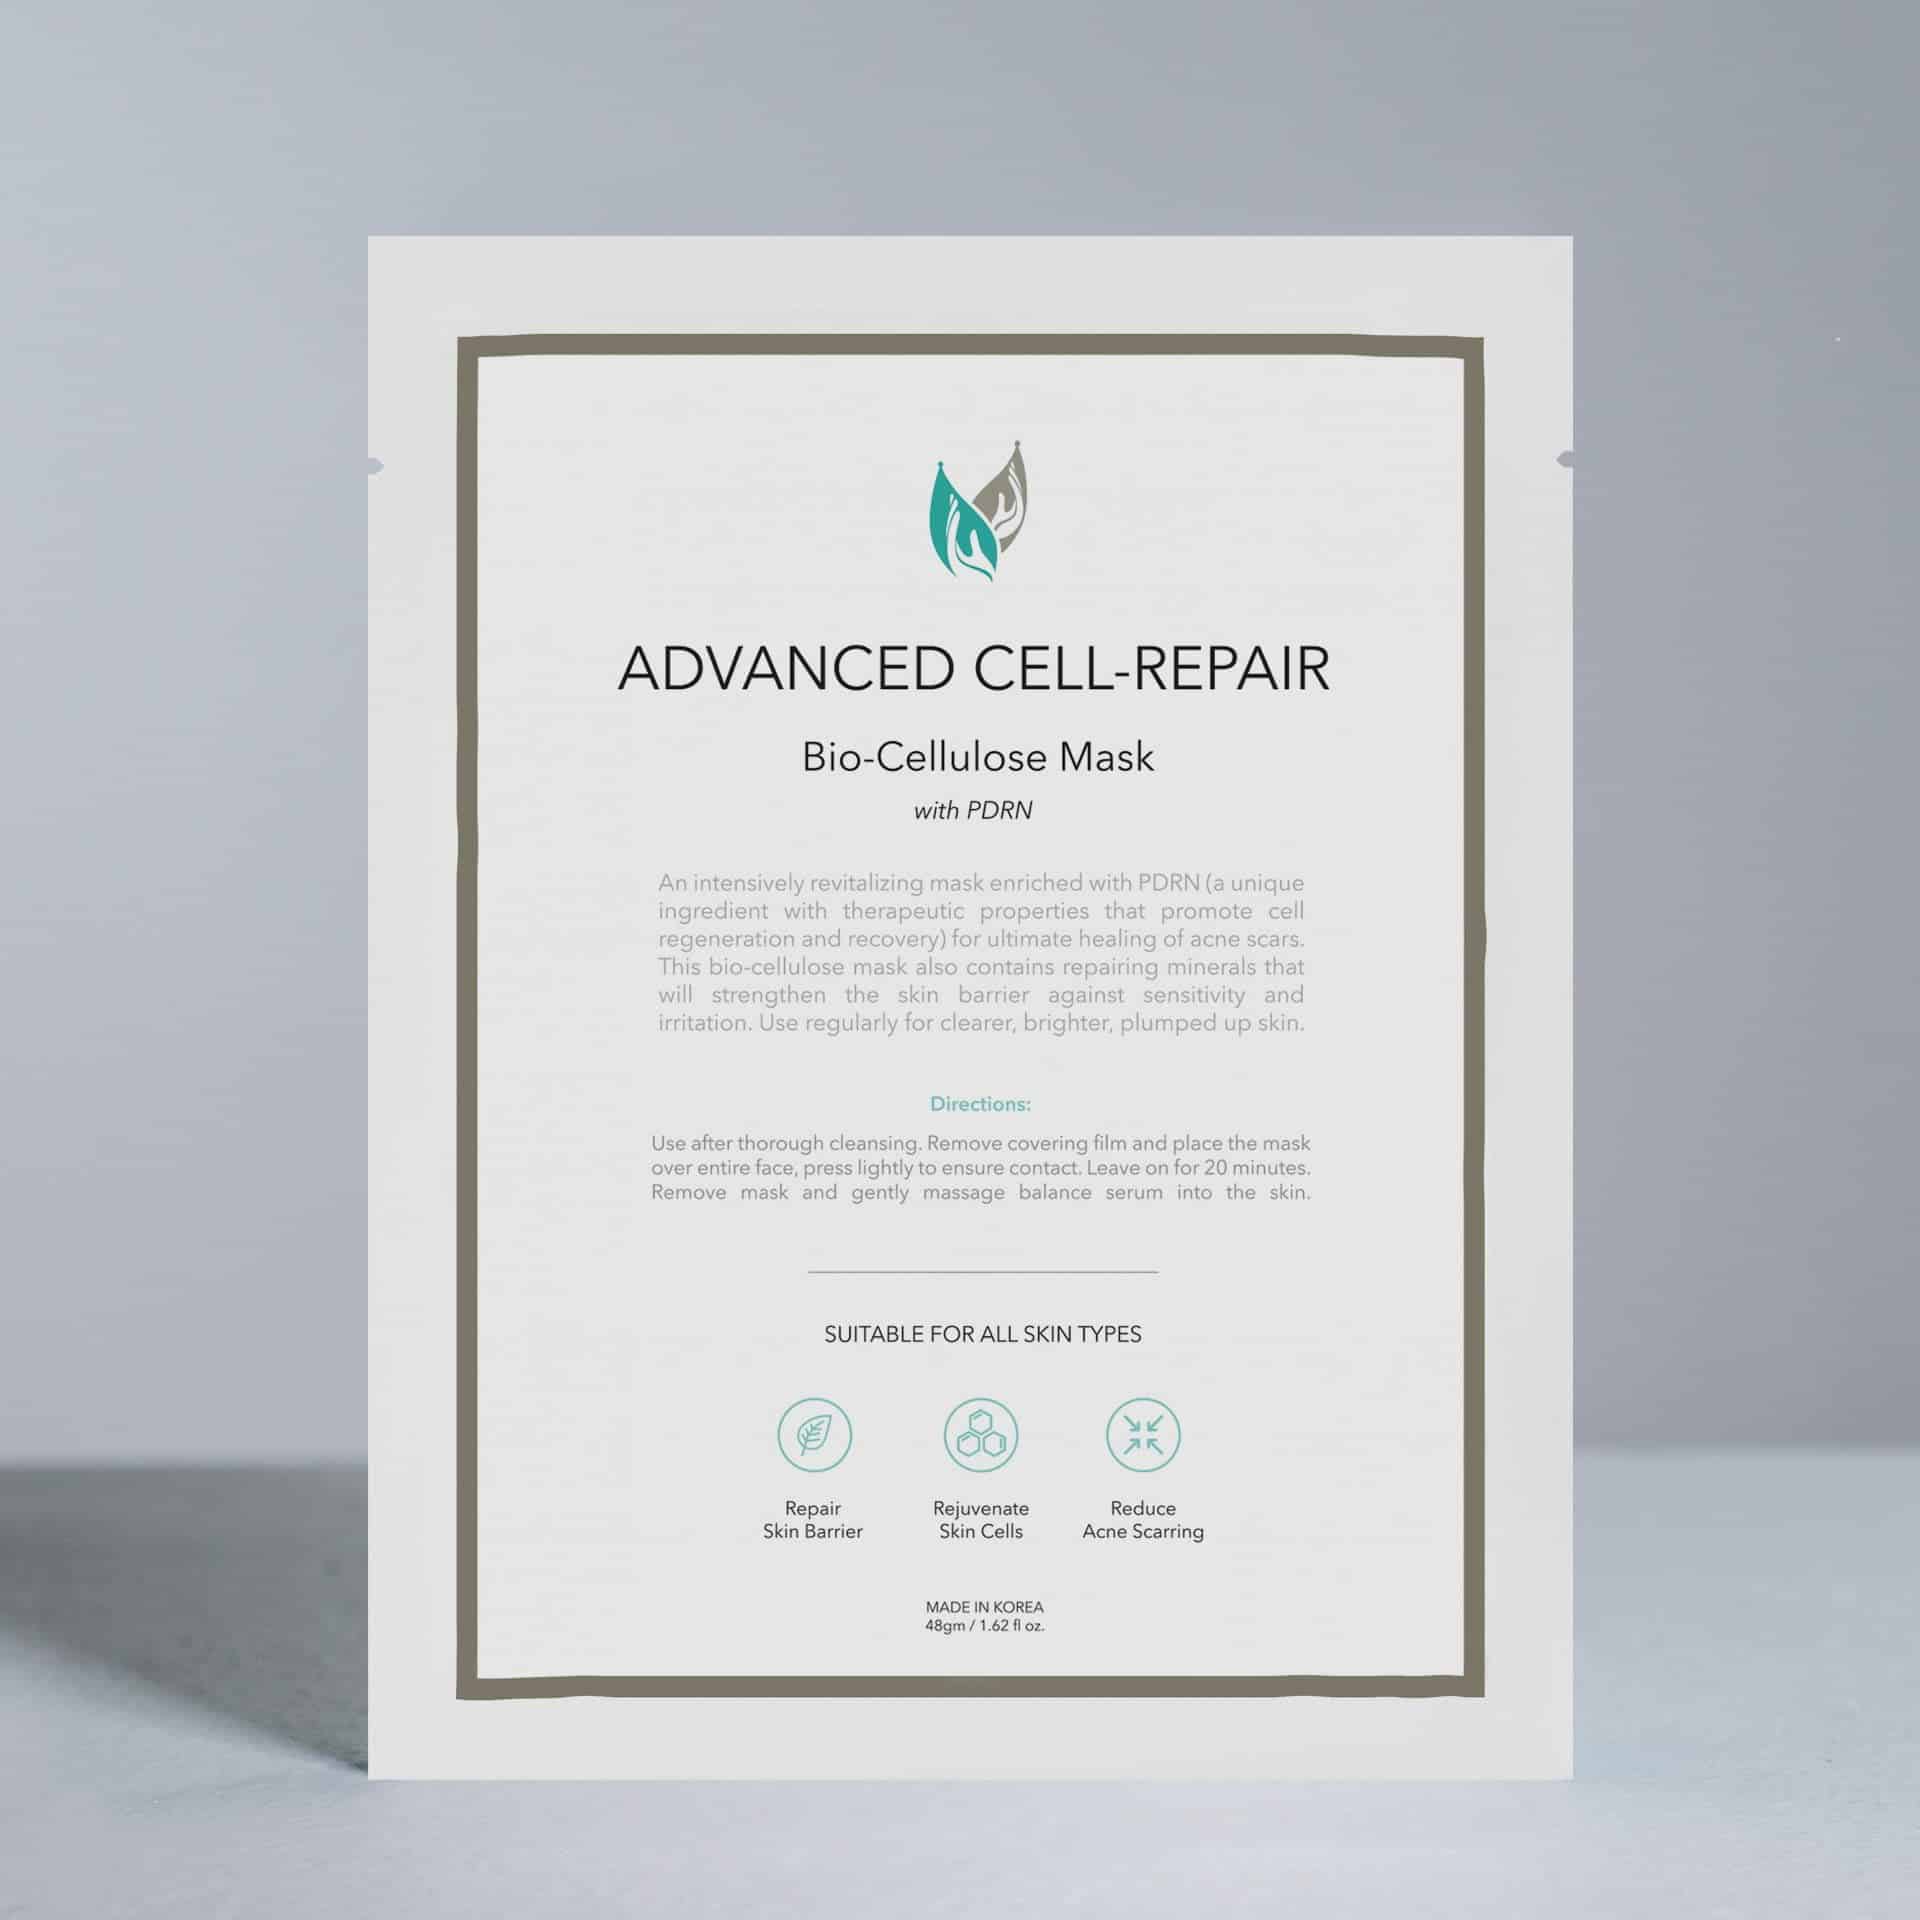 Advanced Cell-Repair Bio-Cellulose Mask with PDRN